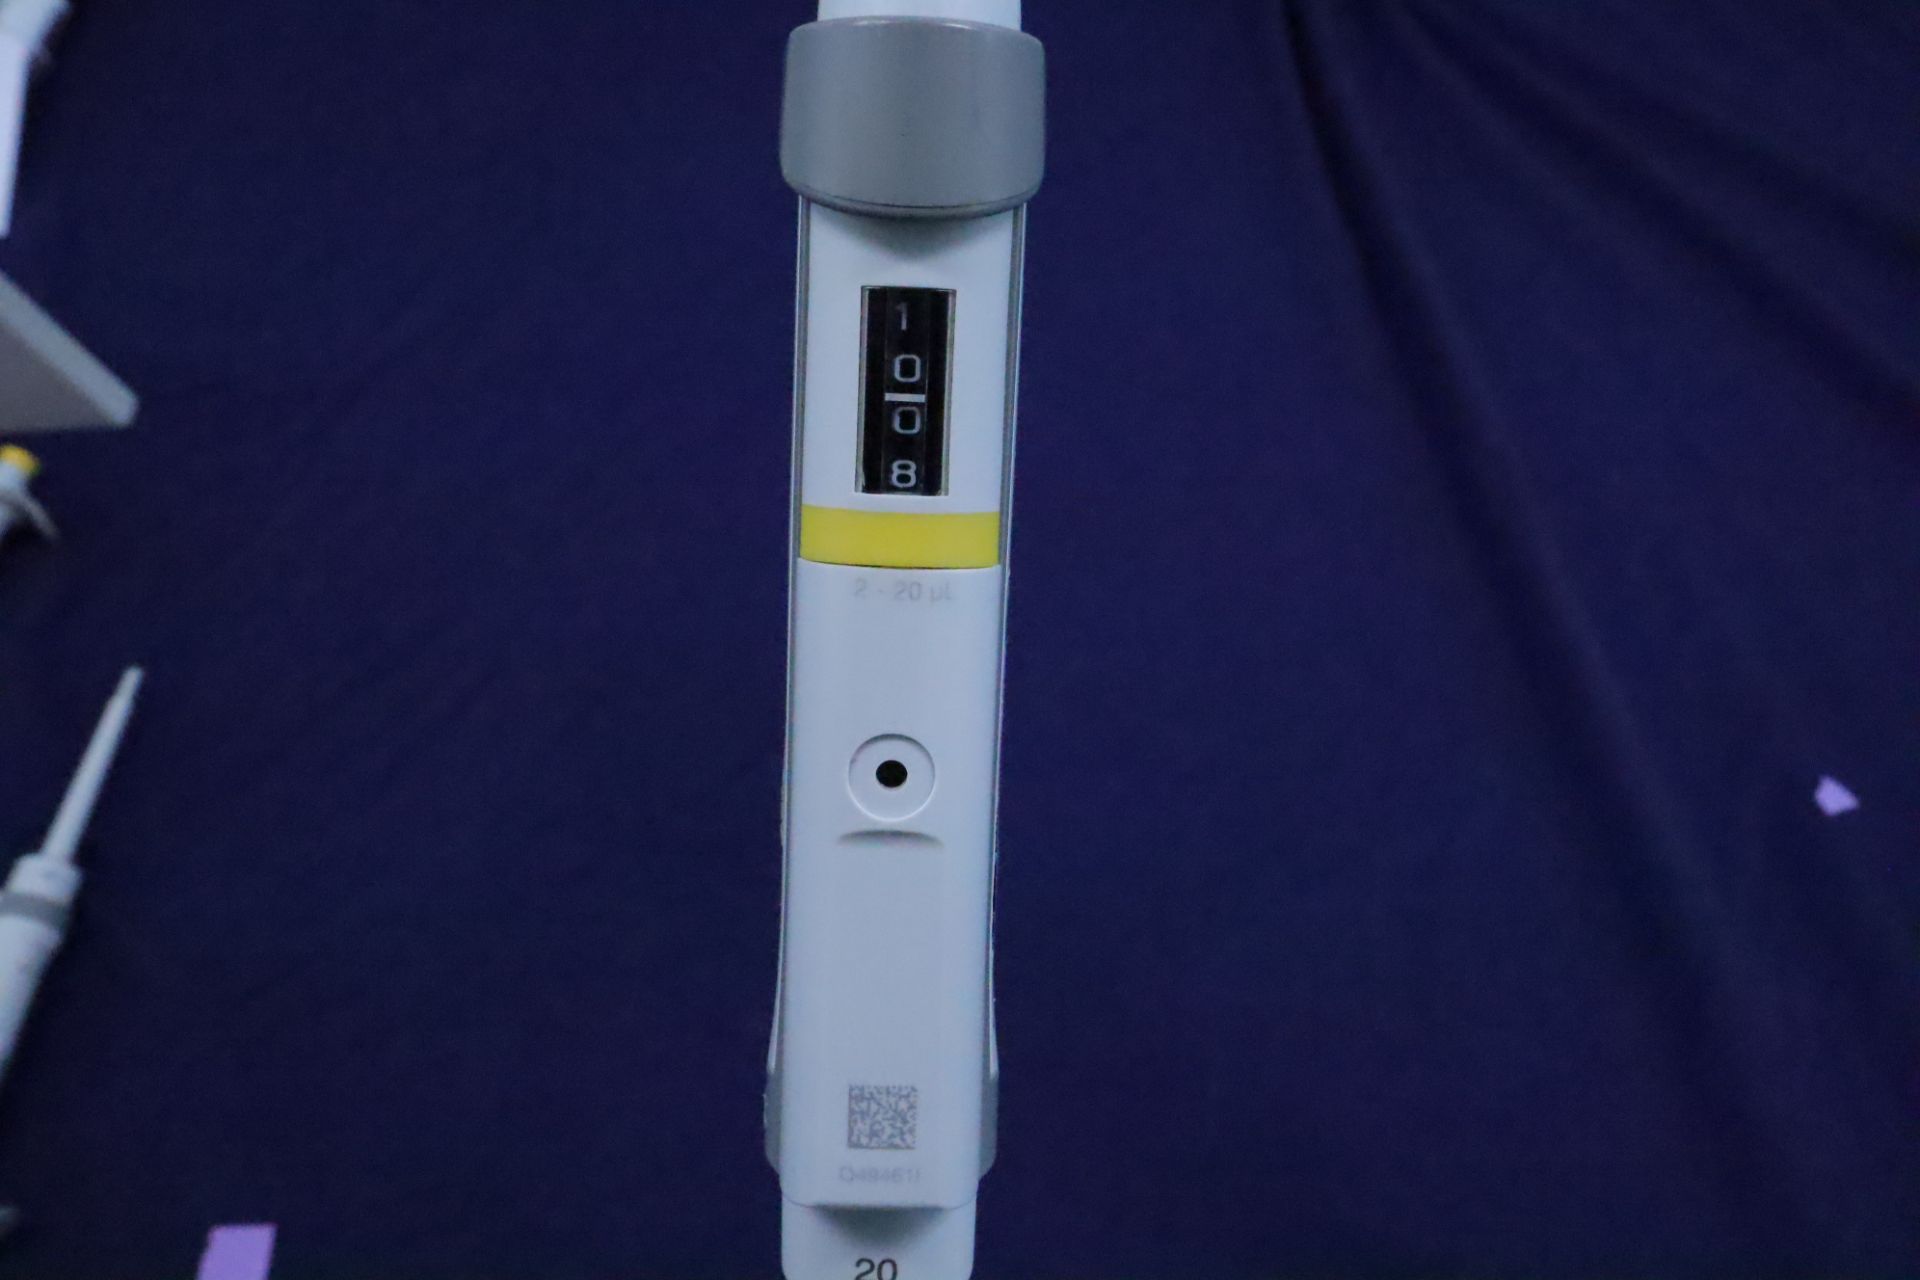 Eppendorf Research Plus Adjustable Volume Pipette 2-20 uL (Qty 2) - Image 3 of 6